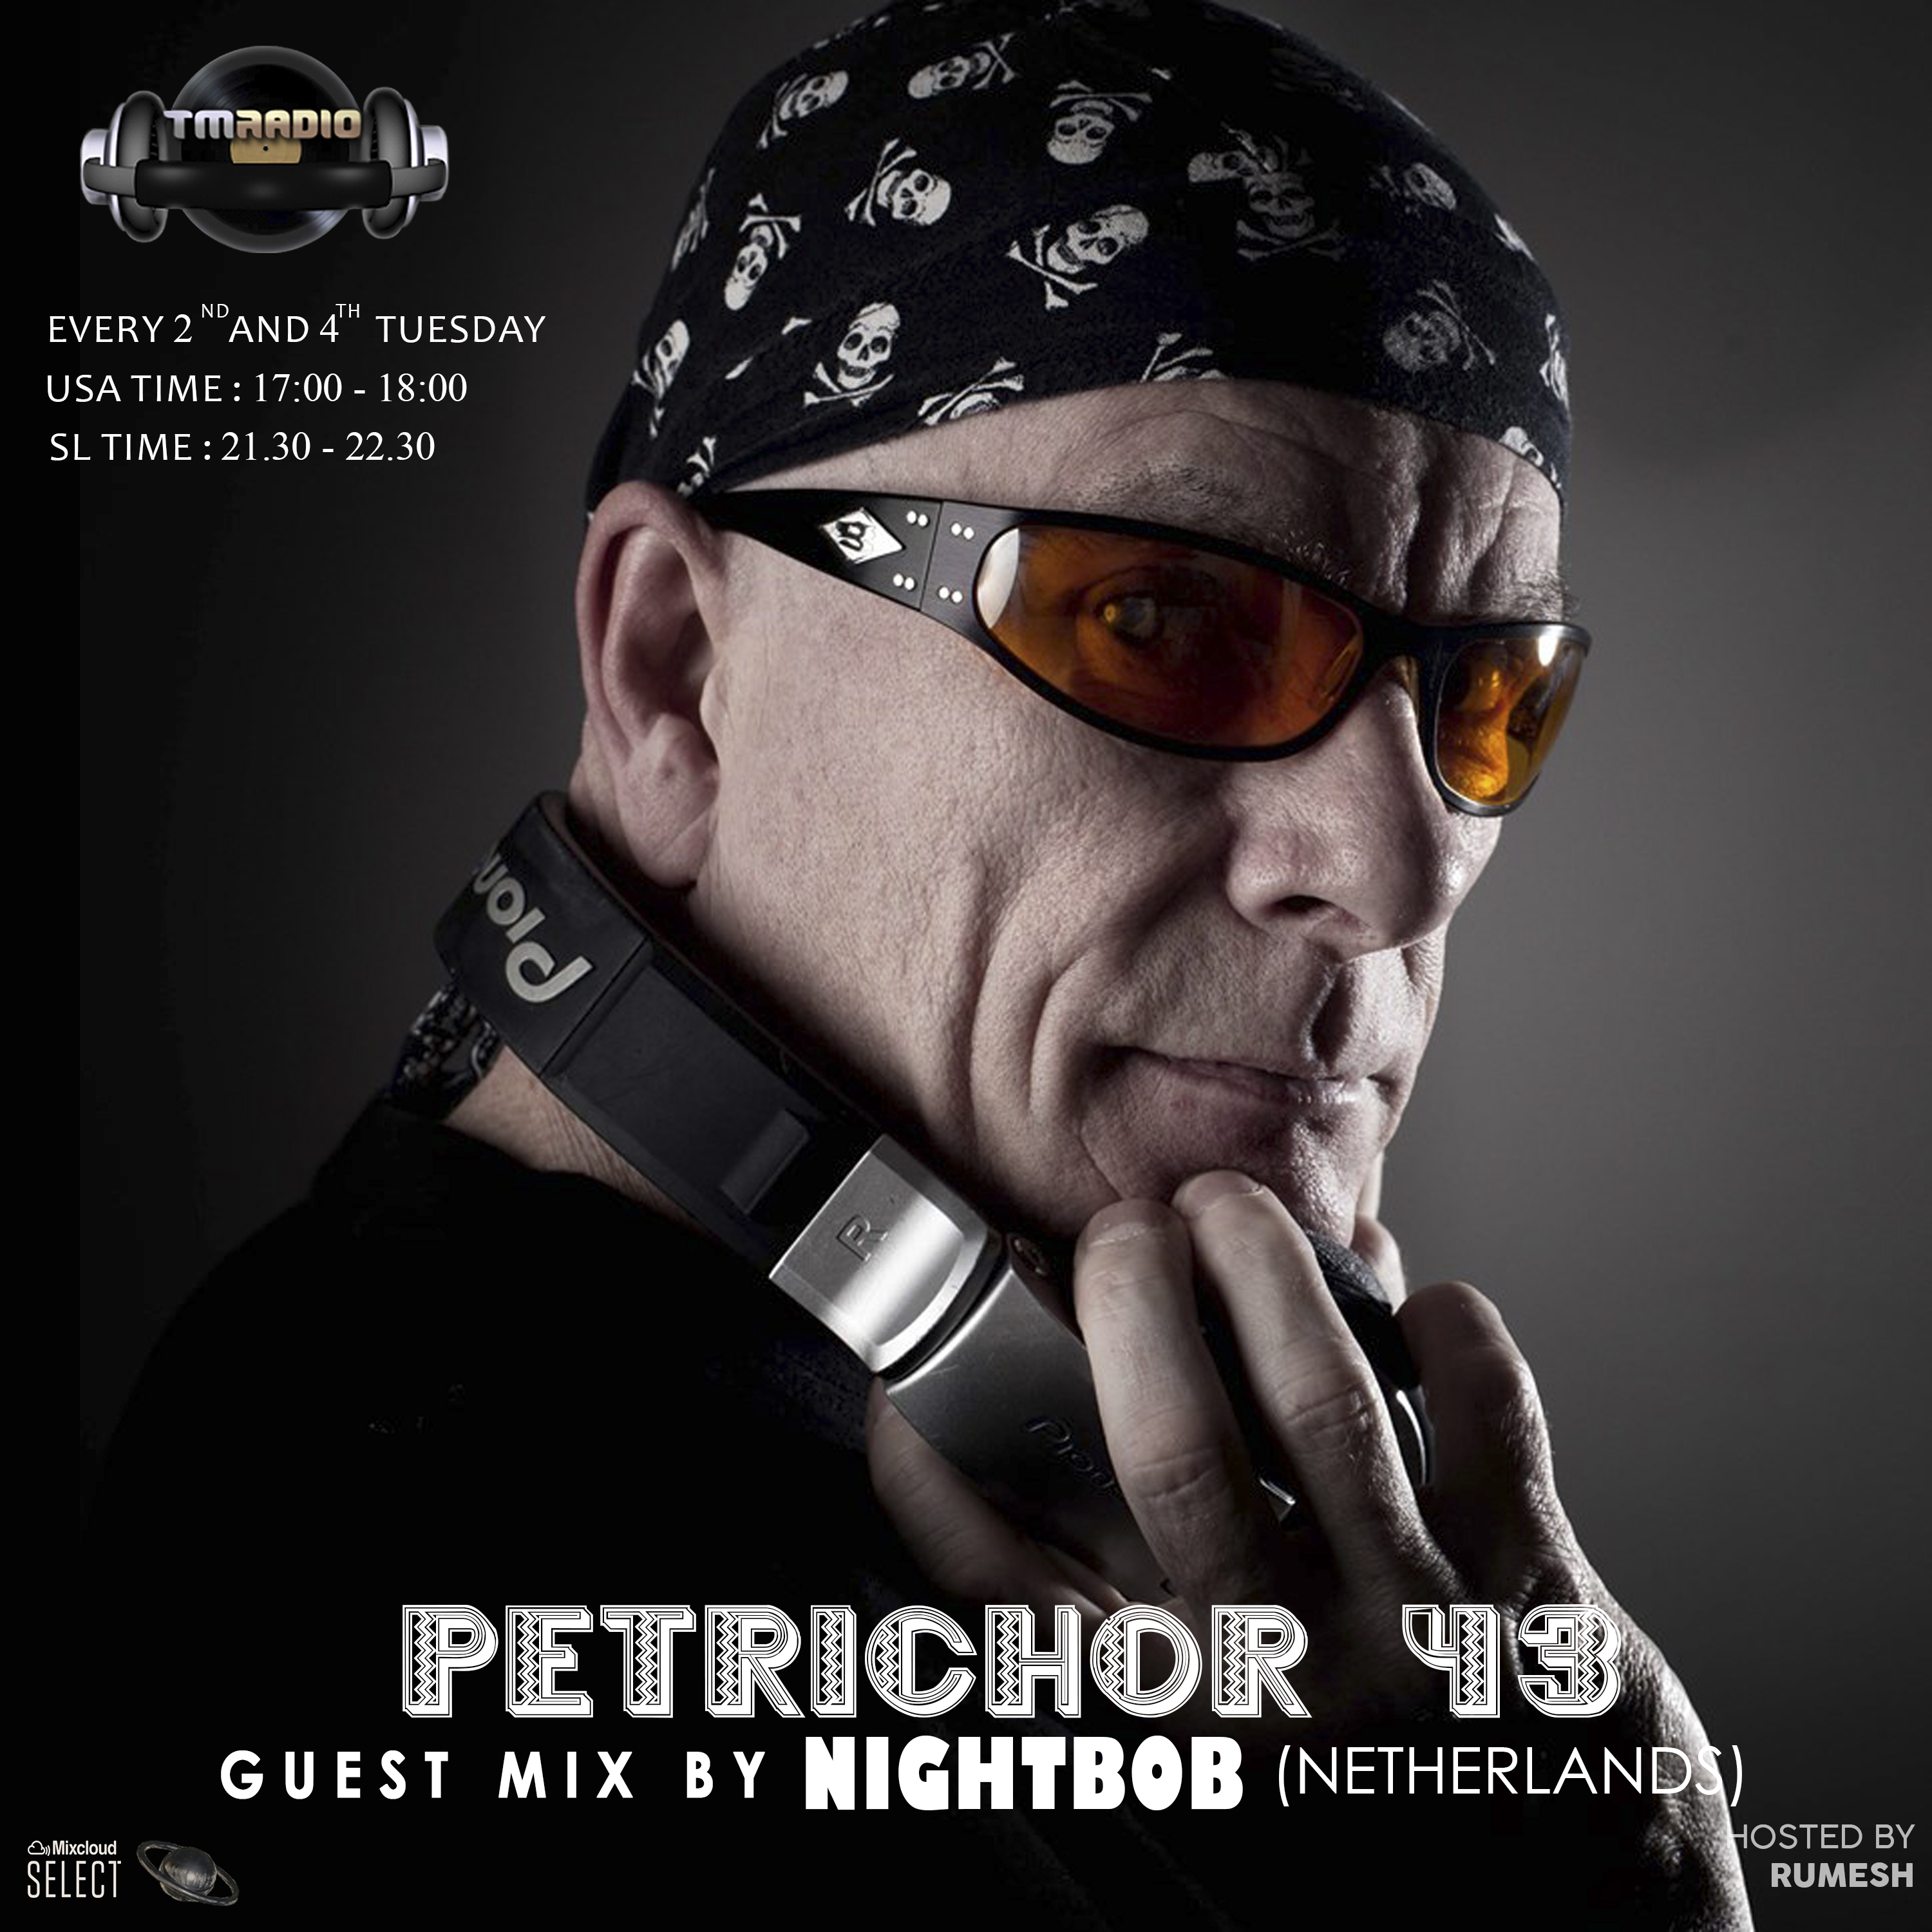 Petrichor :: Petrichor 43 guest mix by Nightbob (Netherlands) (aired on August 27th, 2019) banner logo